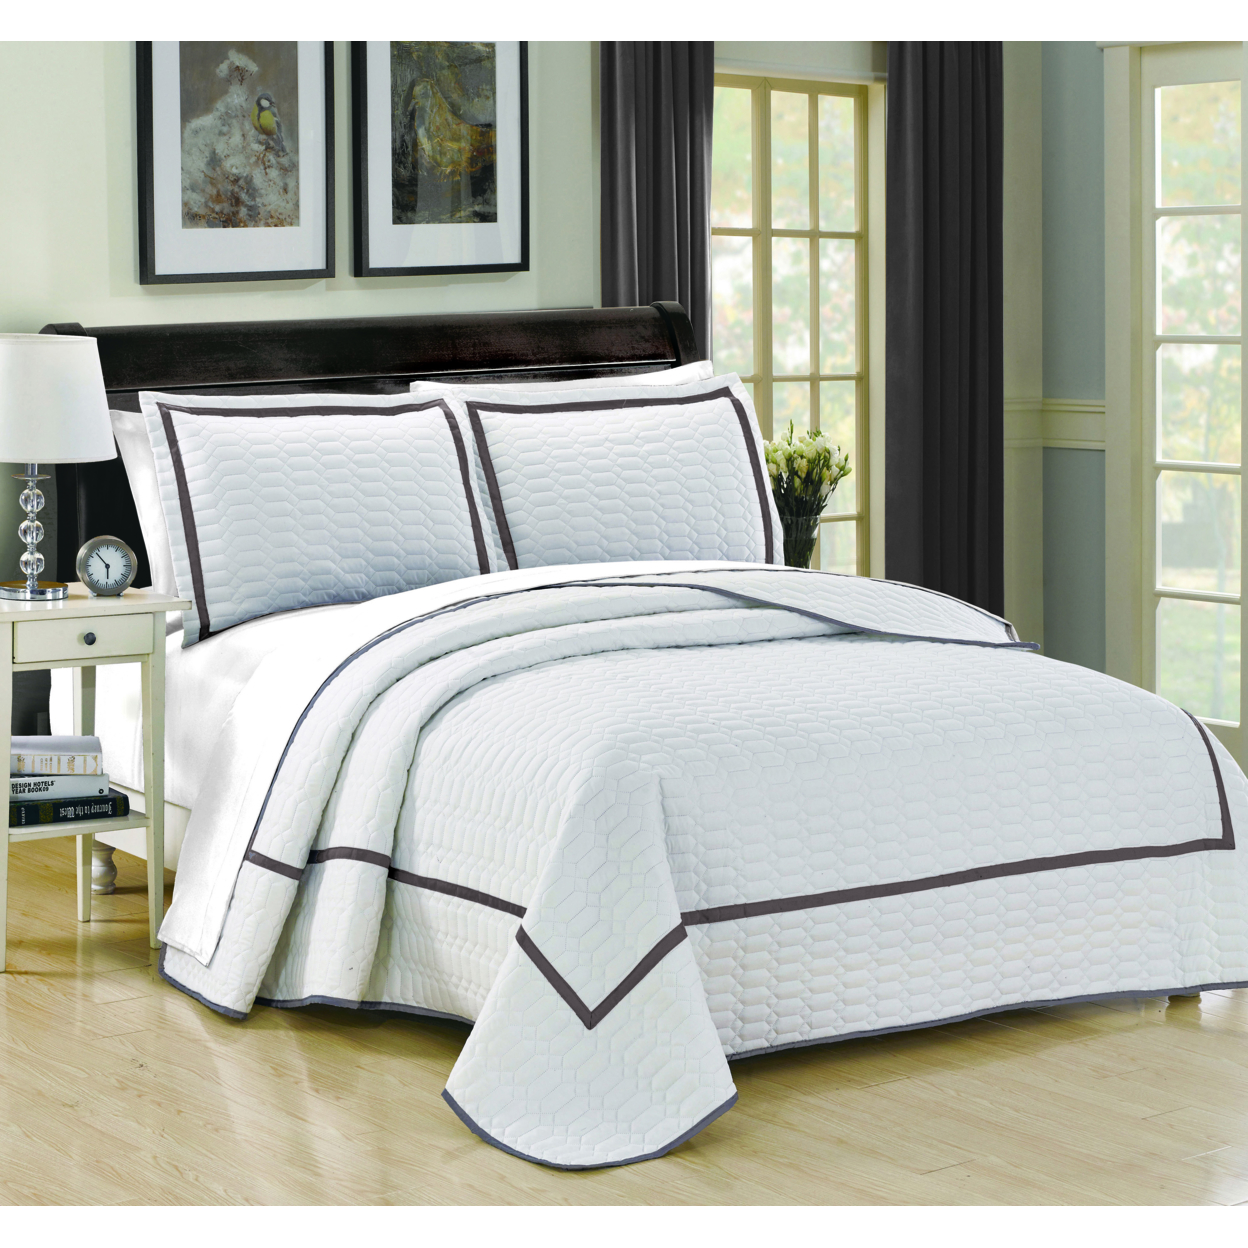 3 Or 2 Piece Halrowe Hotel Collection 2 Tone Banded Quilted Geometrical Embroidered Quilt Set - White, Twin